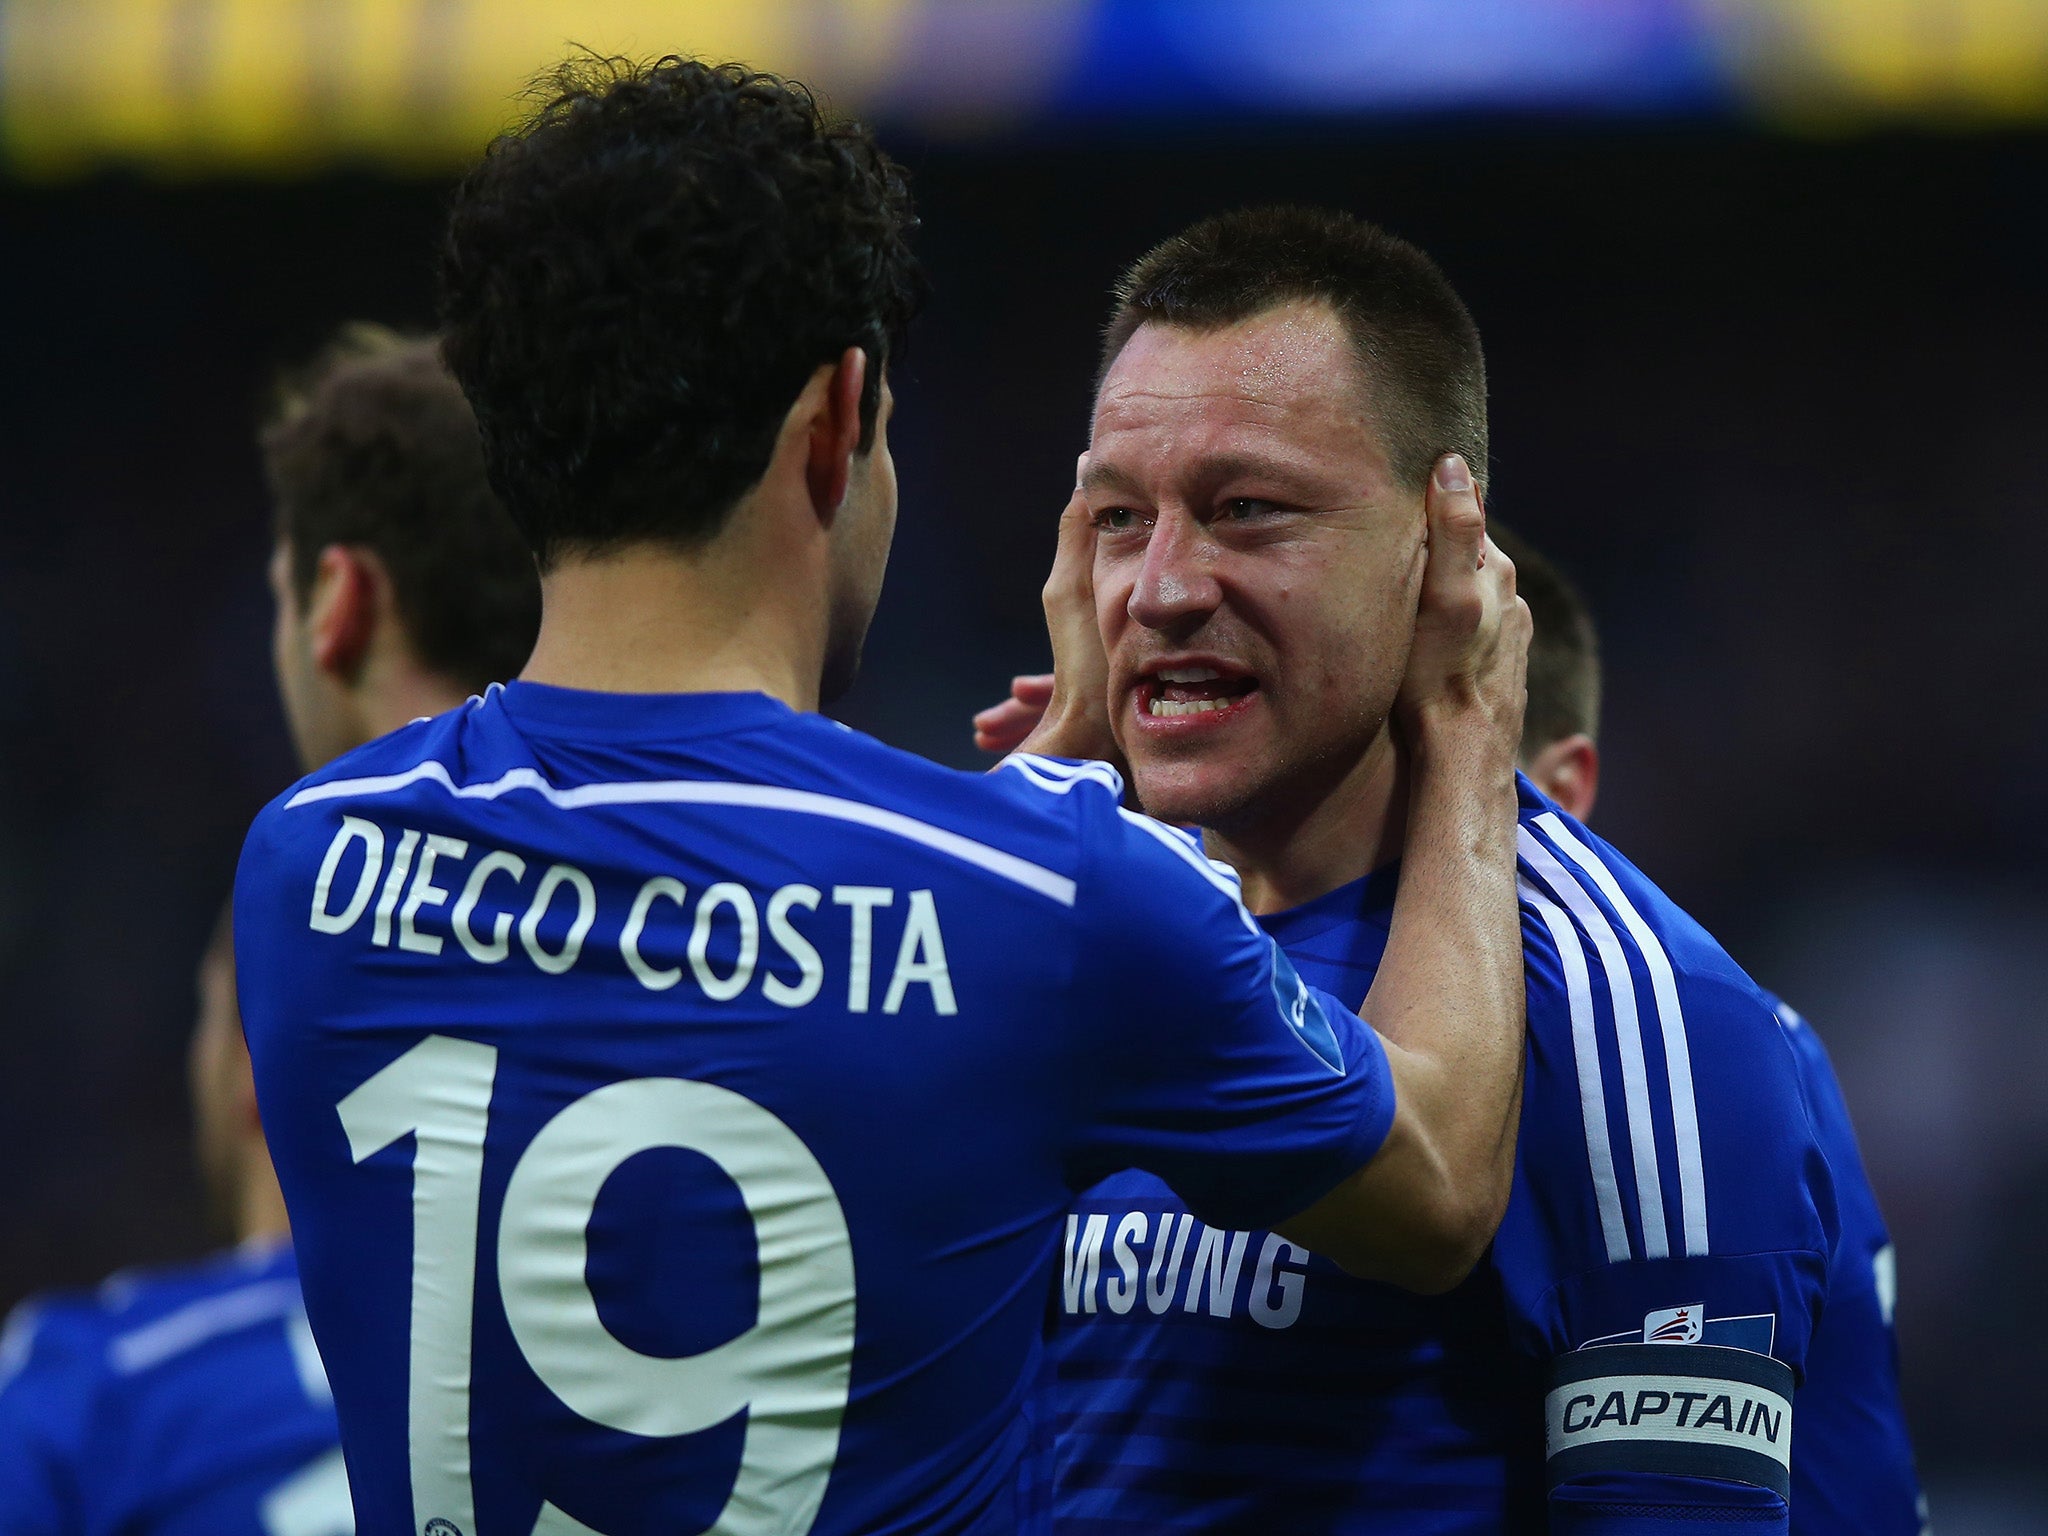 Claims of a bust-up between John Terry and Diego Costa have been dismissed by the club